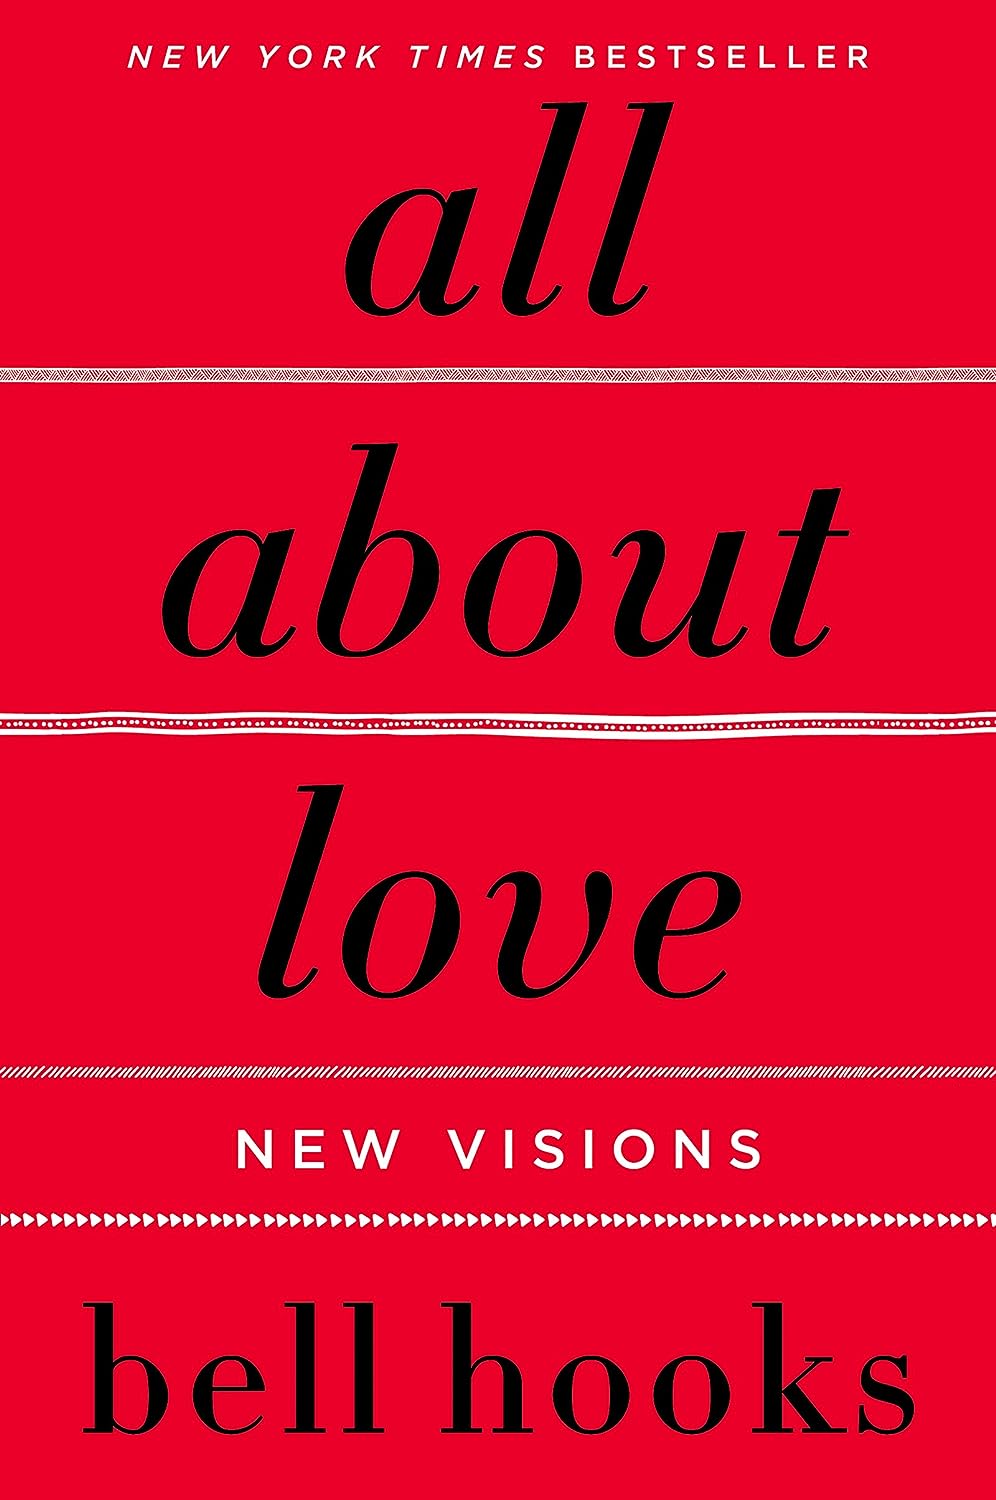 bell hooks: All About Love (2018)